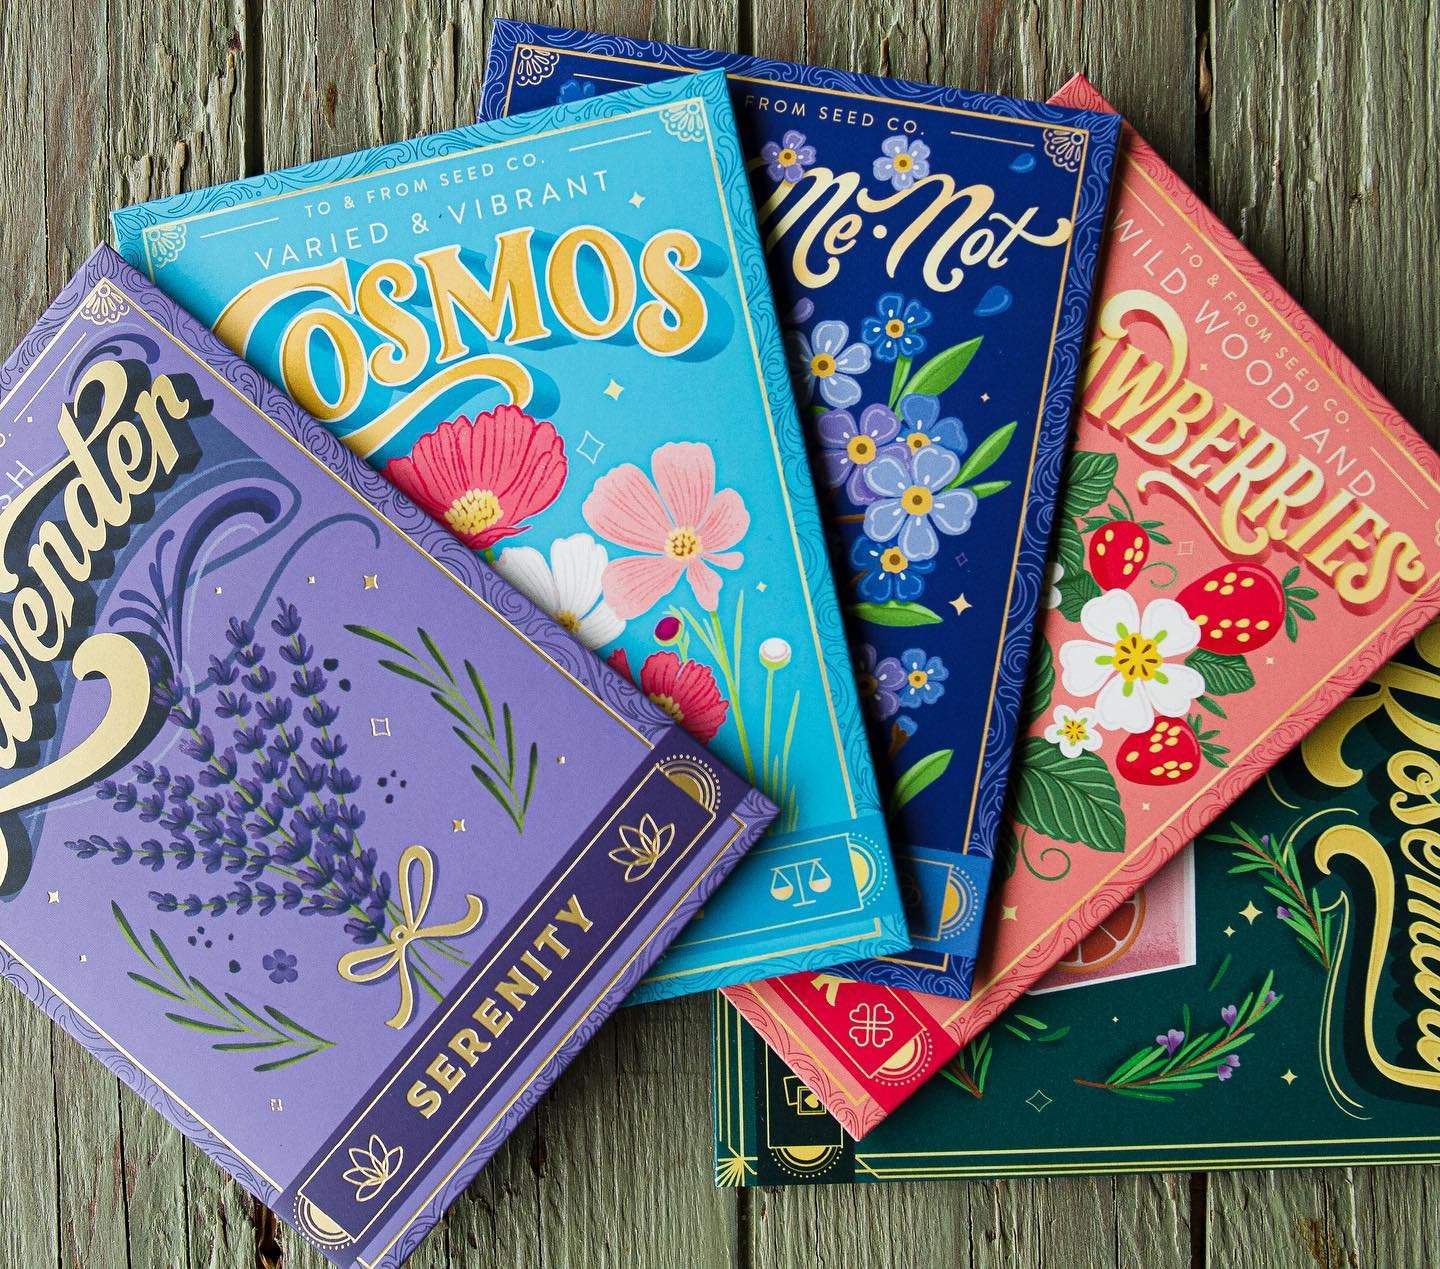 Spring is almost here 🌸 and we can&rsquo;t wait to get into our garden especially with our new seeds from @toandfrom.gifts! We are absolutely obsessed with these seed packets and they make the perfect gift for the gardener in your life! 19 different